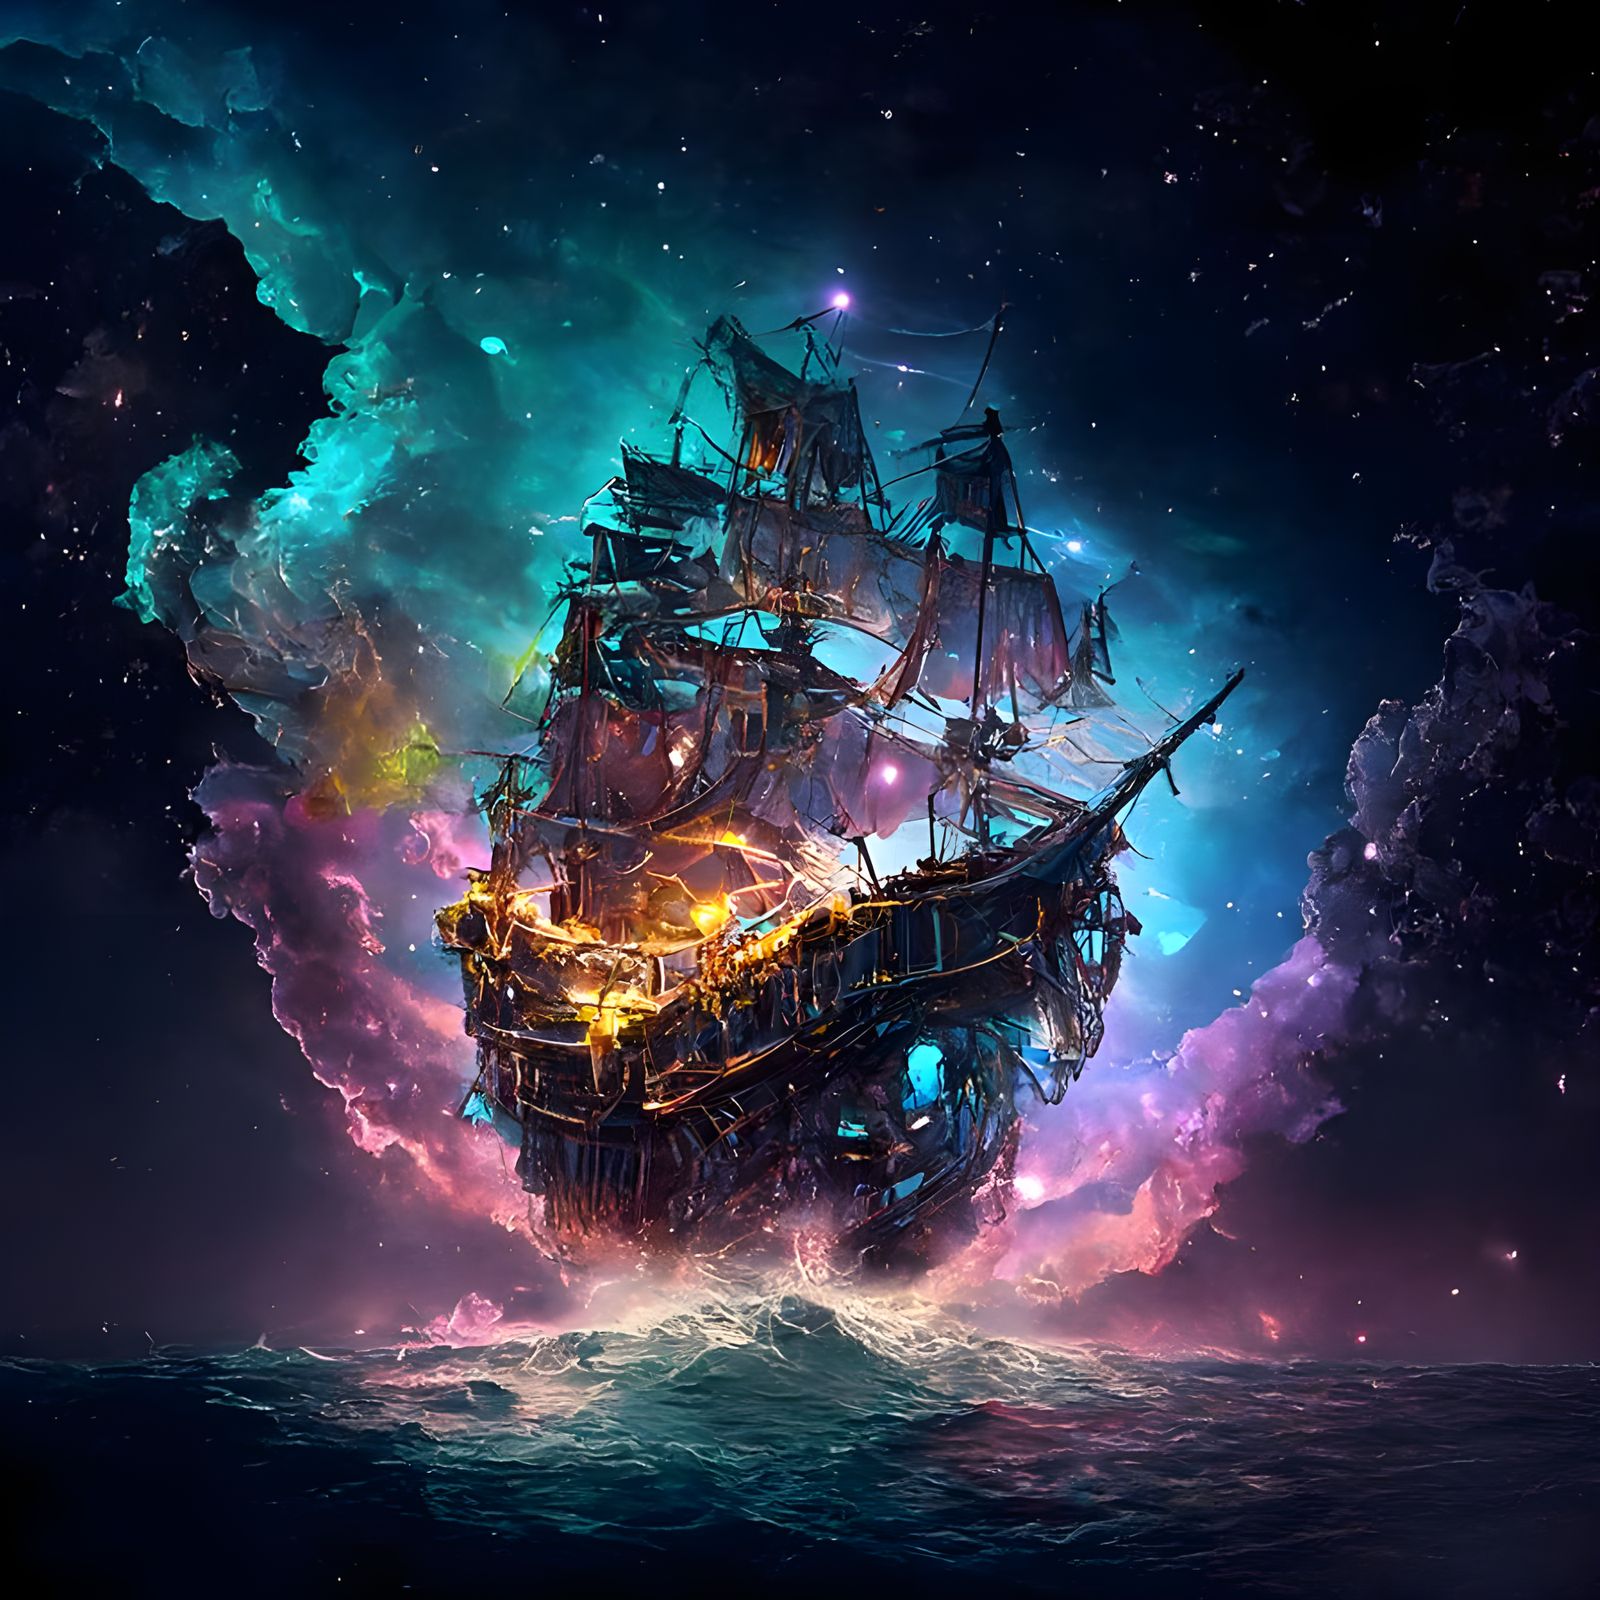 Ghostly Pirate Ship